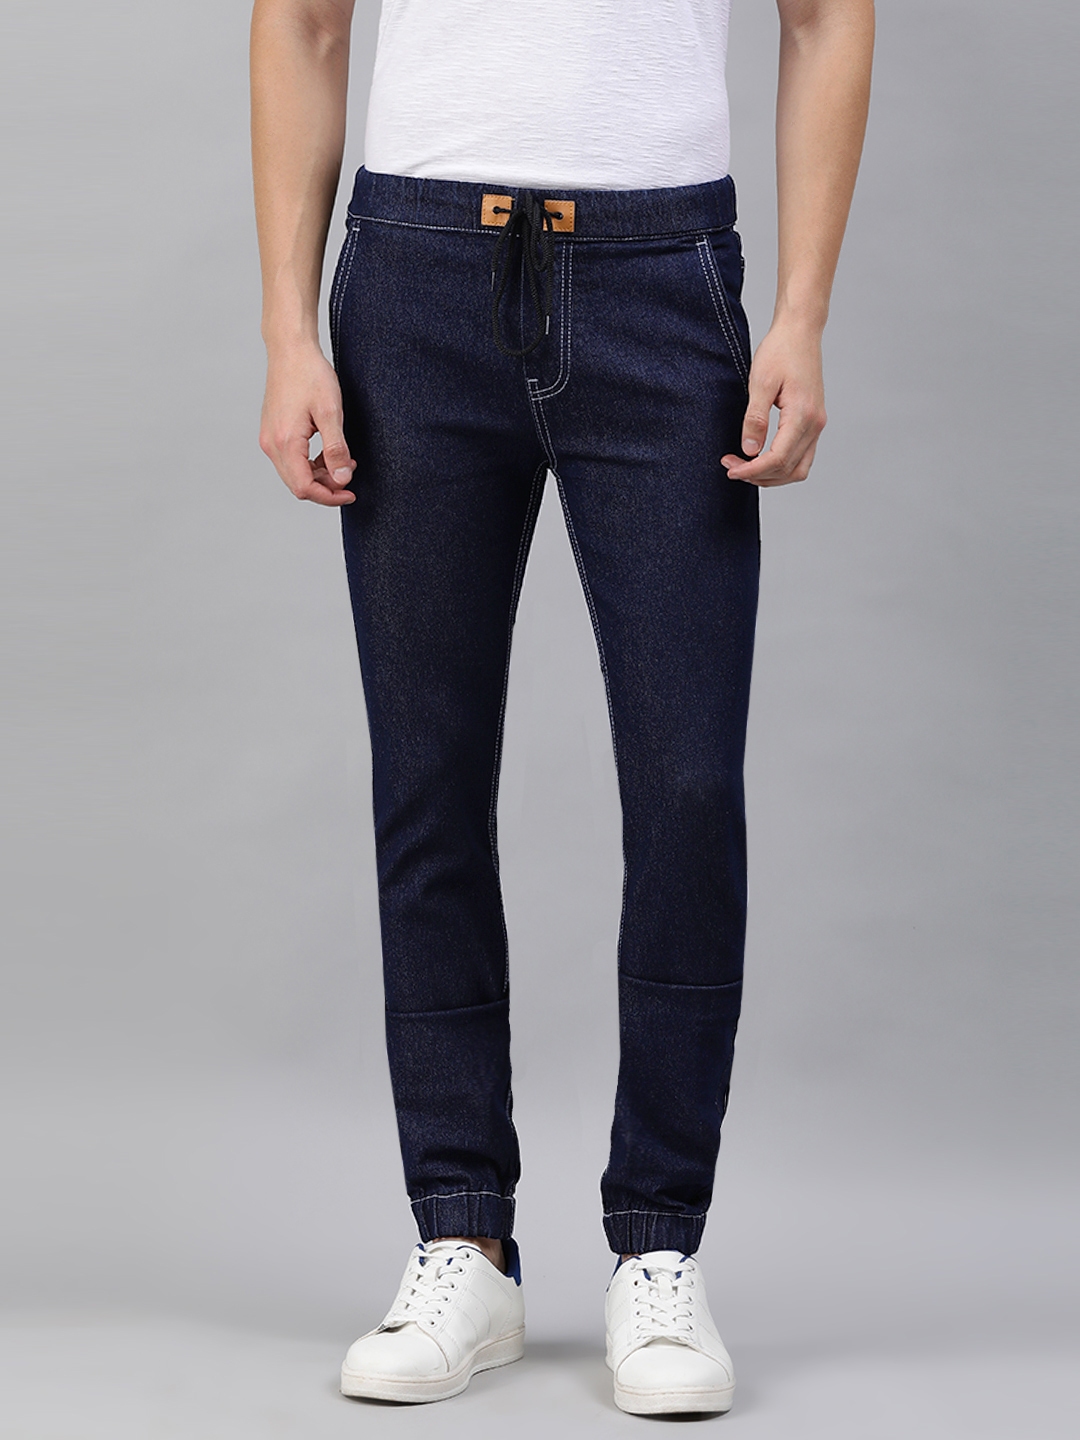 METRONAUT Jogger Fit Women Light Blue Jeans - Buy METRONAUT Jogger Fit Women  Light Blue Jeans Online at Best Prices in India